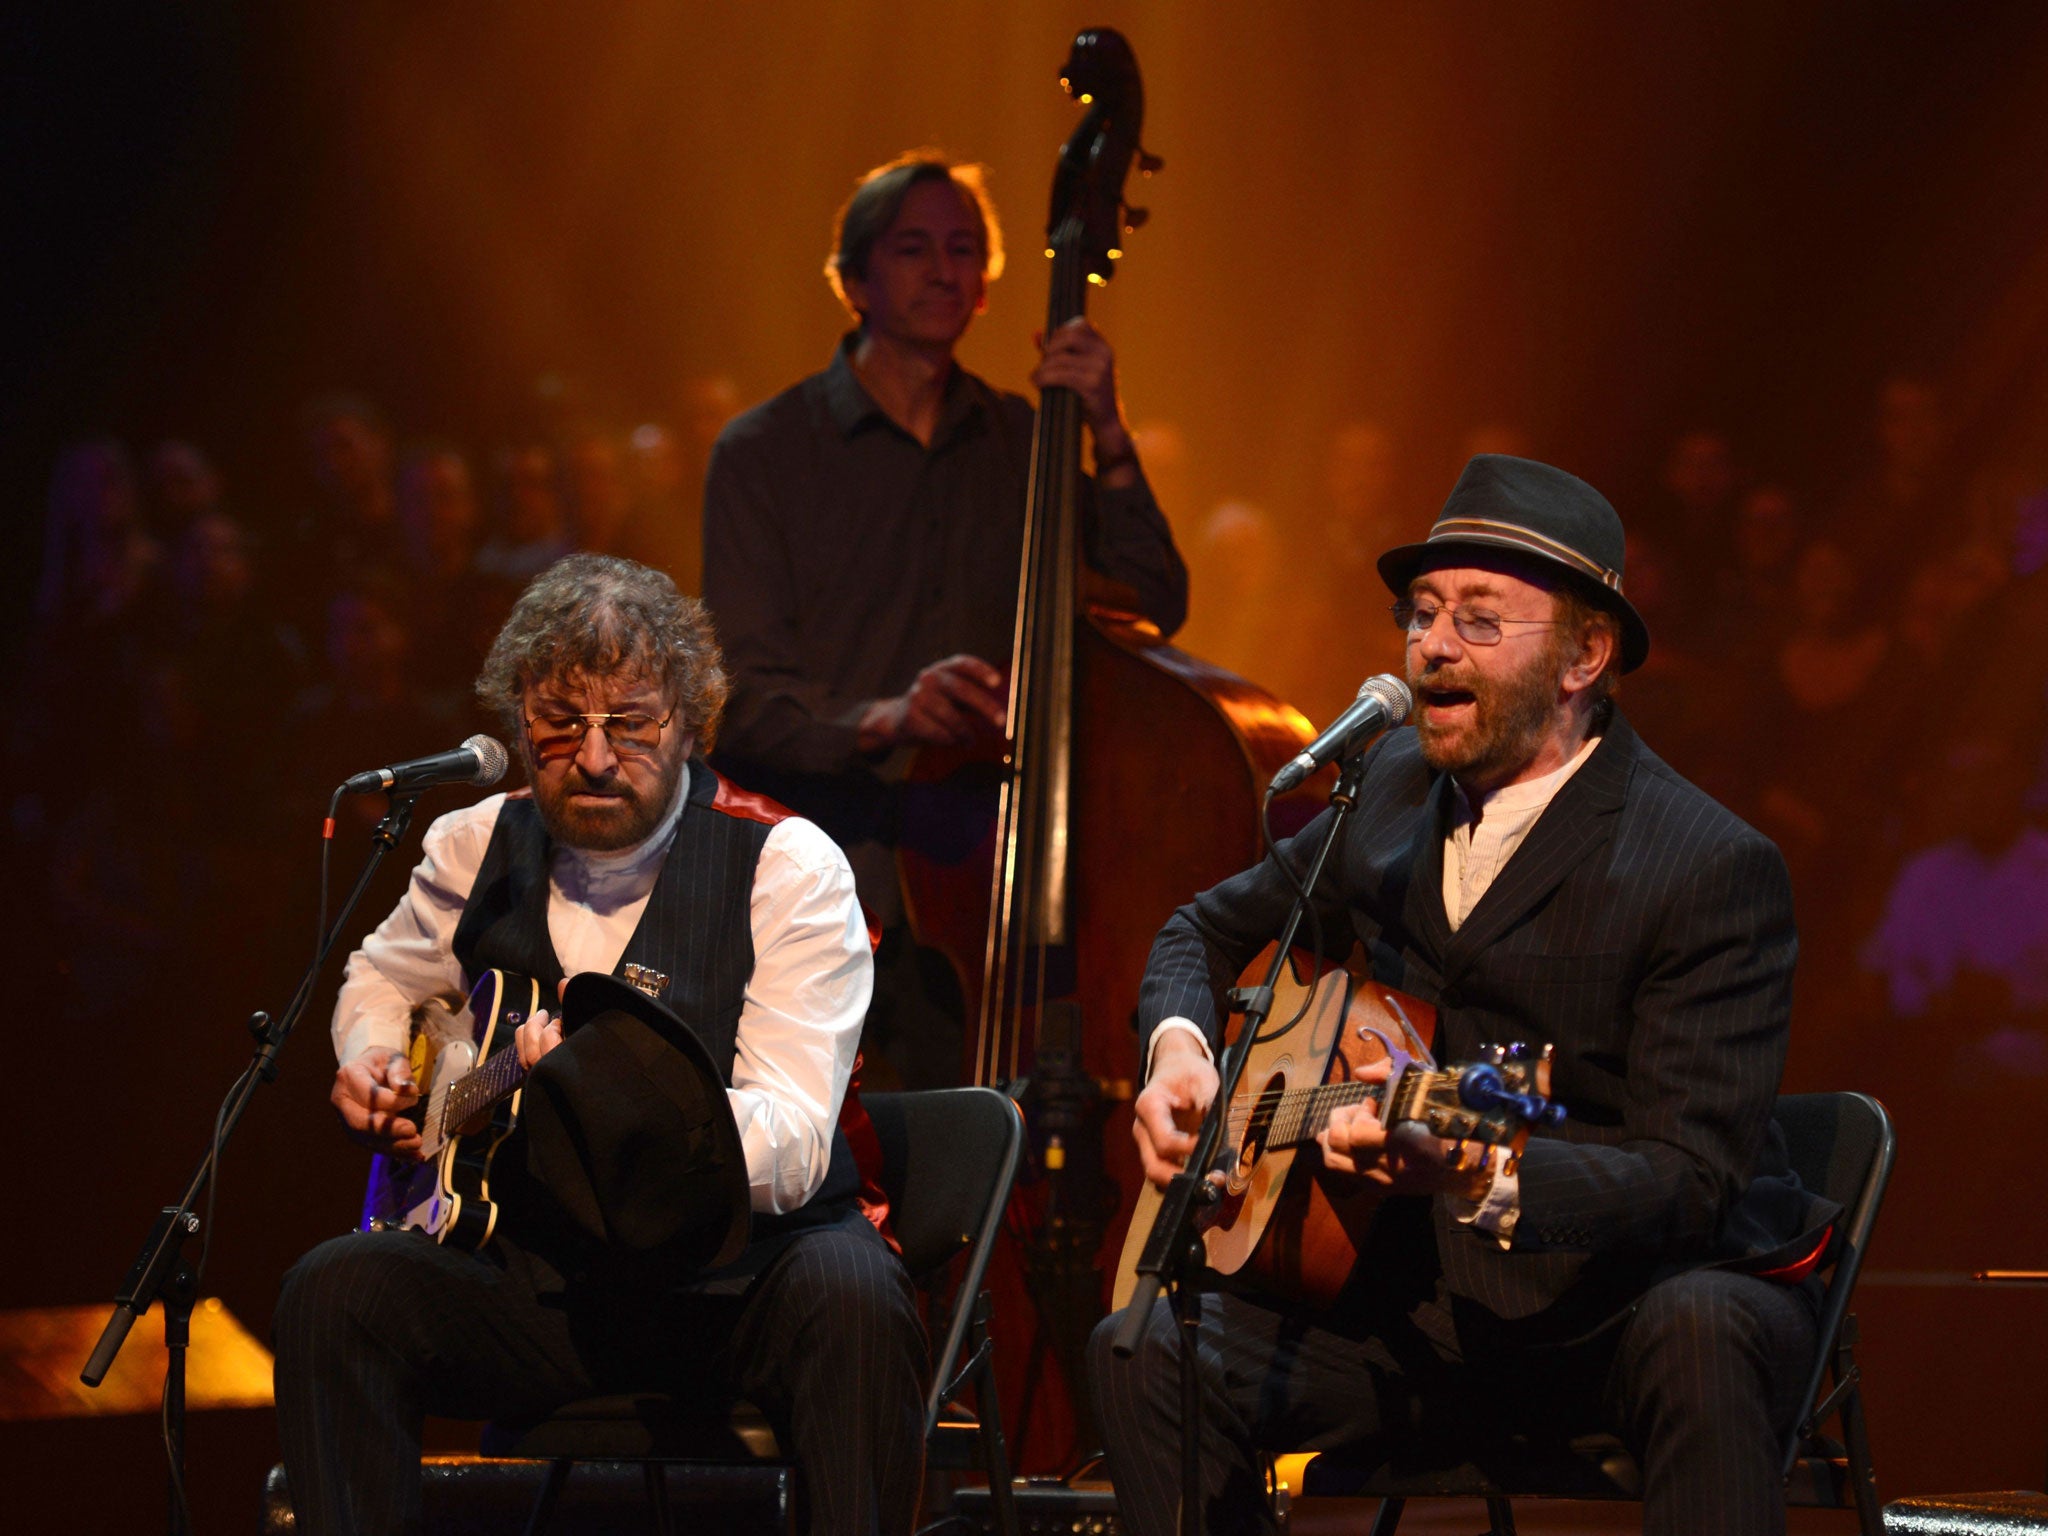 Chas and Dave - Chas Hodges, Dave Peacock